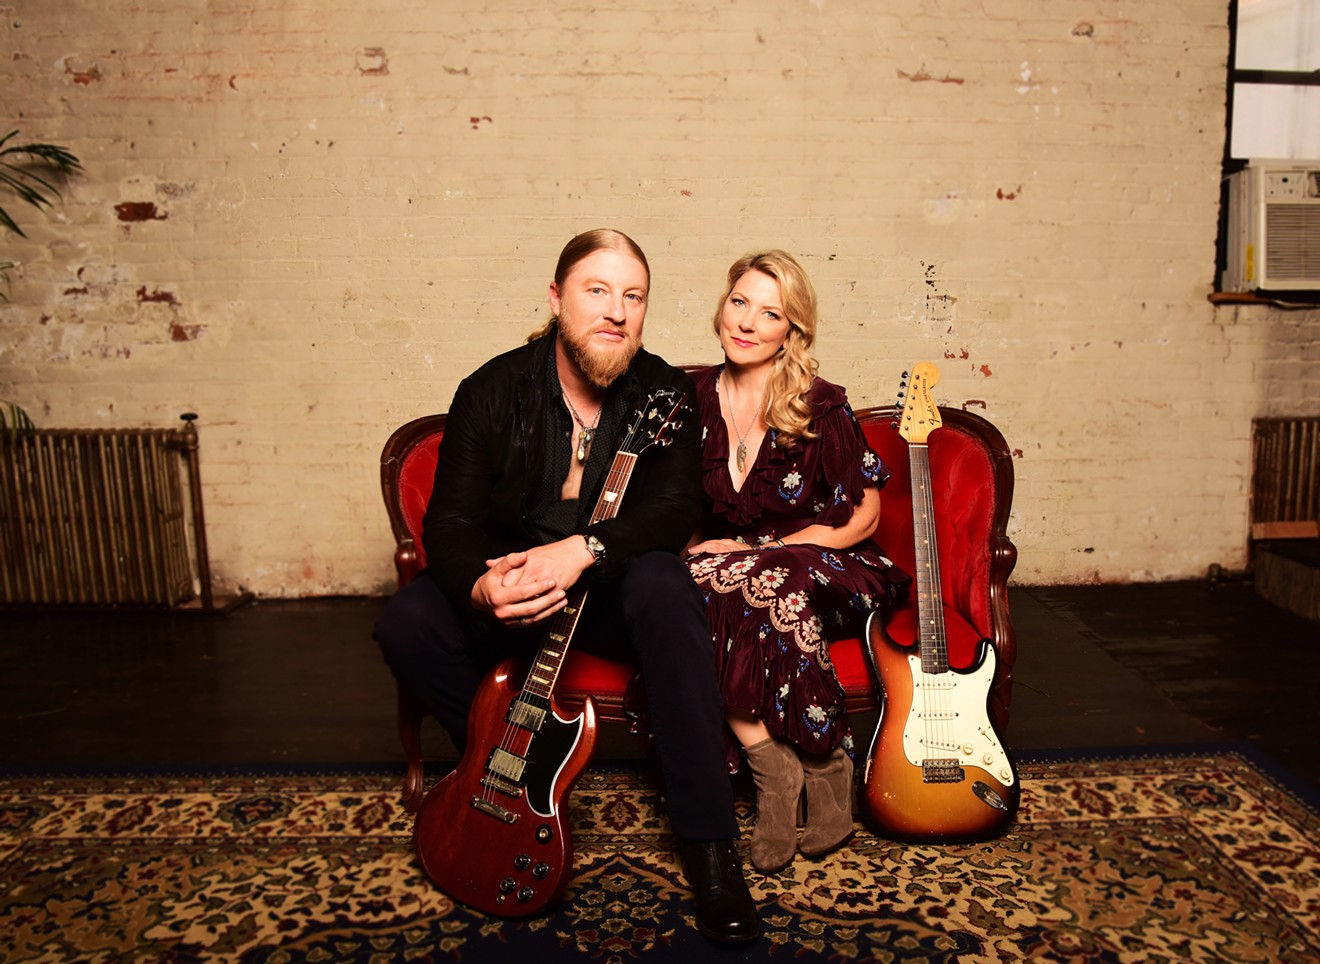 The Tedeschi-Trucks Band brings its husband-and-wife team to Red Rocks July 26 and 27.